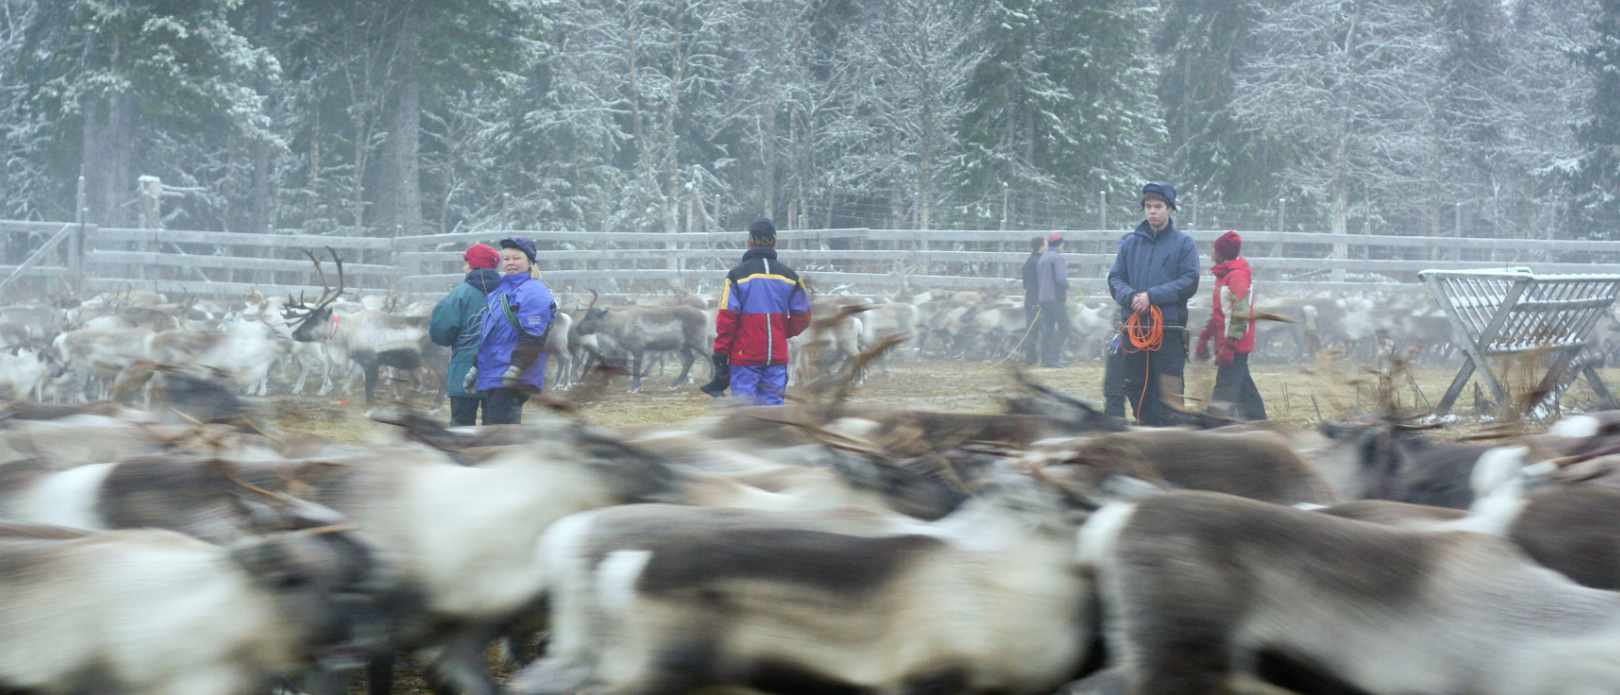 Reindeer owners survey the herd before separation begins and mark any unmarked calves